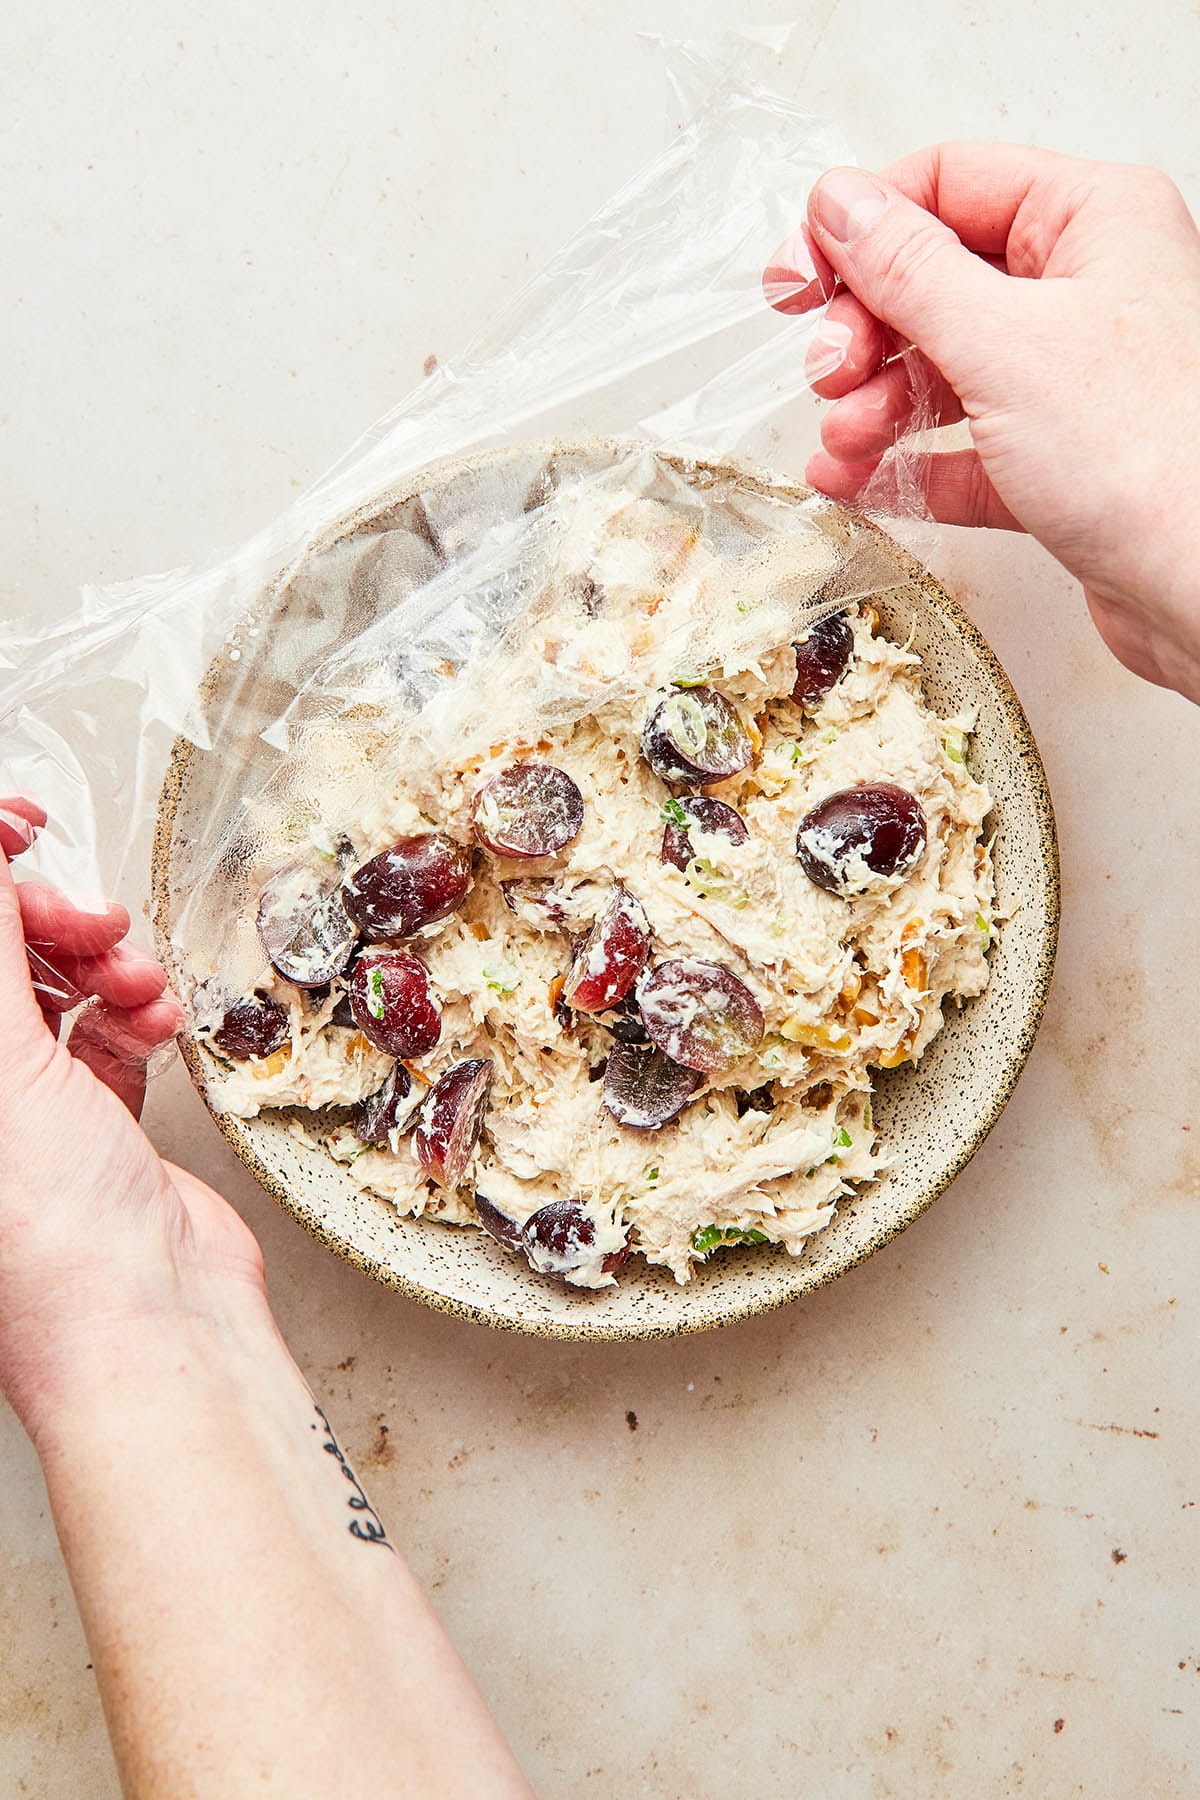 Hands removing plastic wrap from a bowl of easy chicken salad.